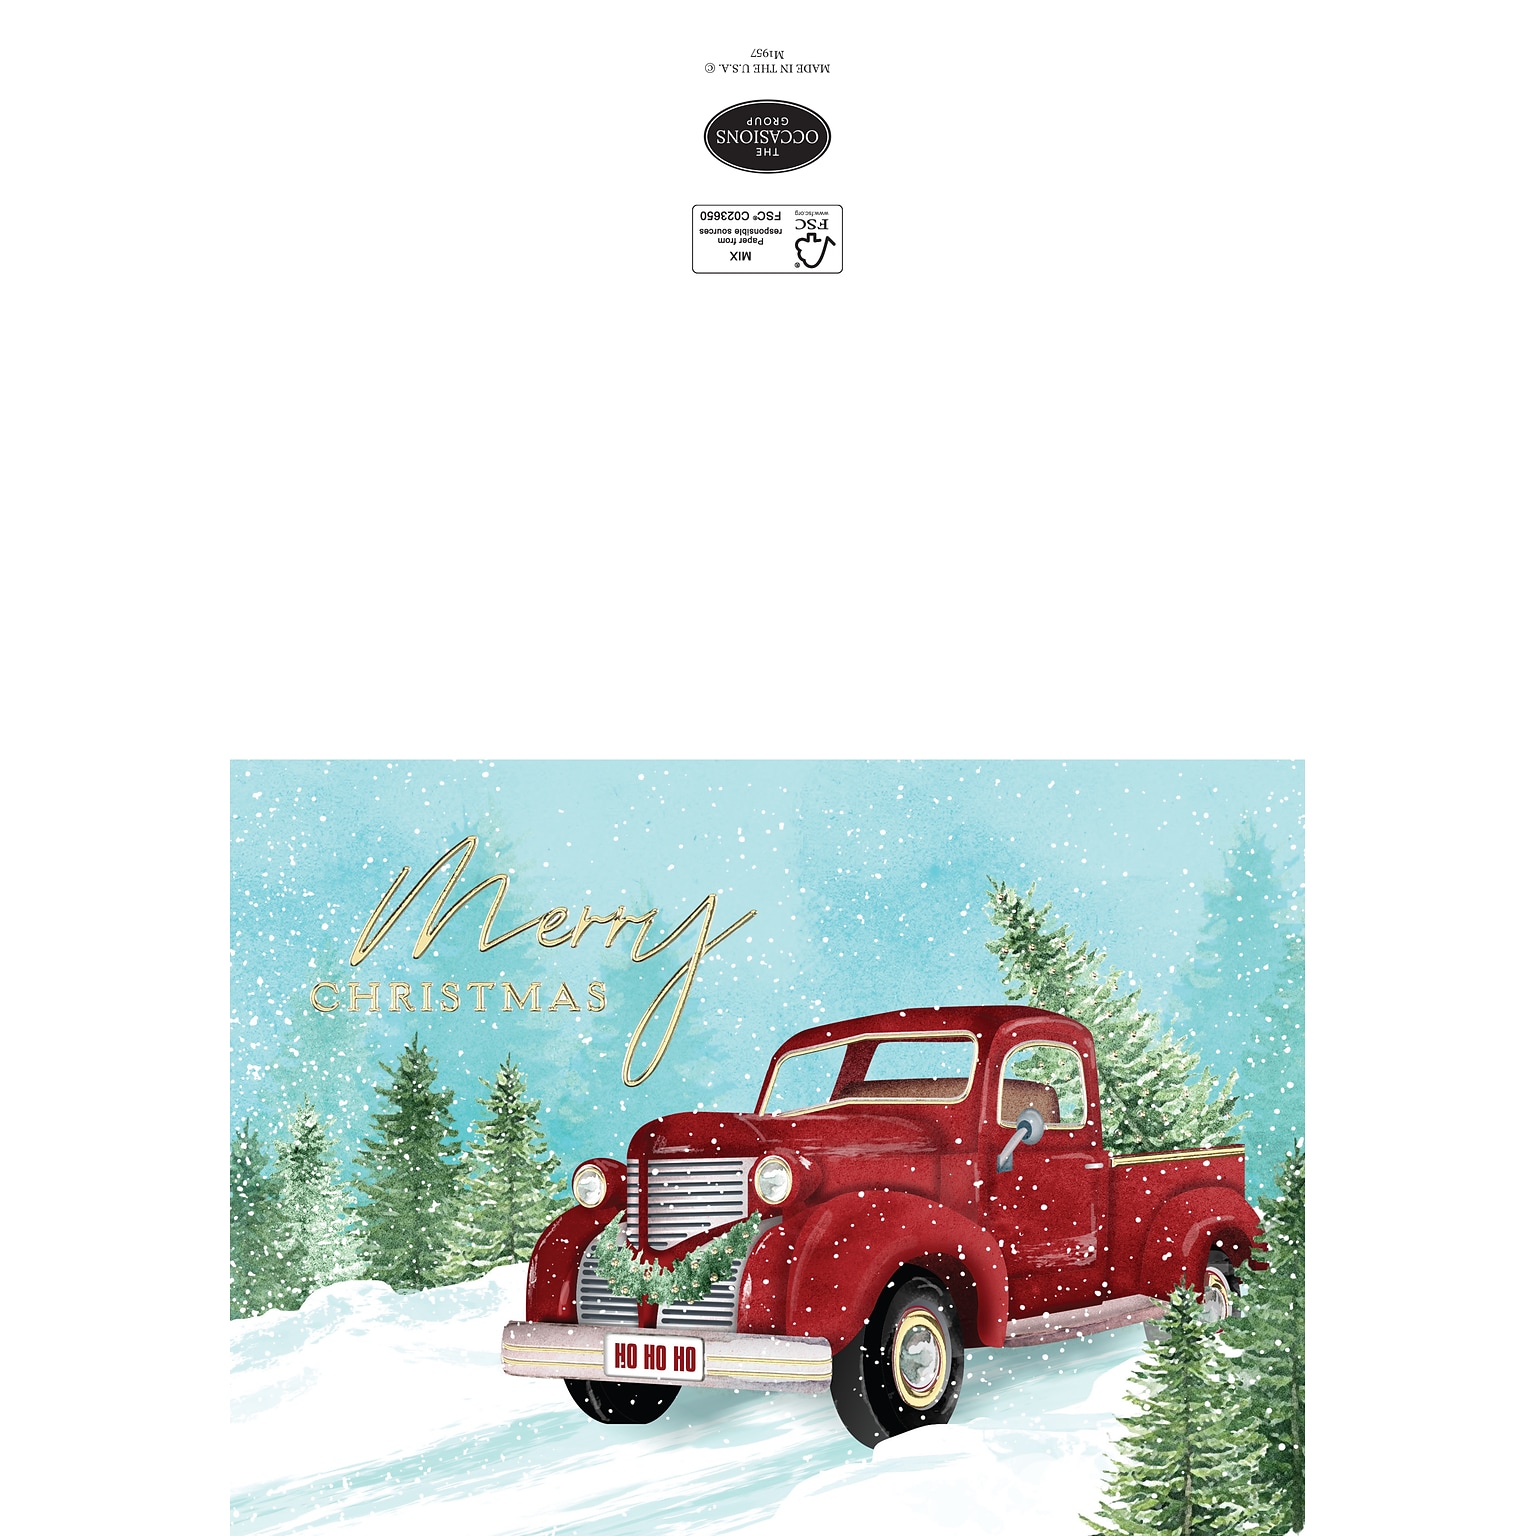 Custom Merry Christmas Vintage Red Truck With Trees Cards, with Envelopes, 7-7/8 x 5-5/8, 25 Cards per Set